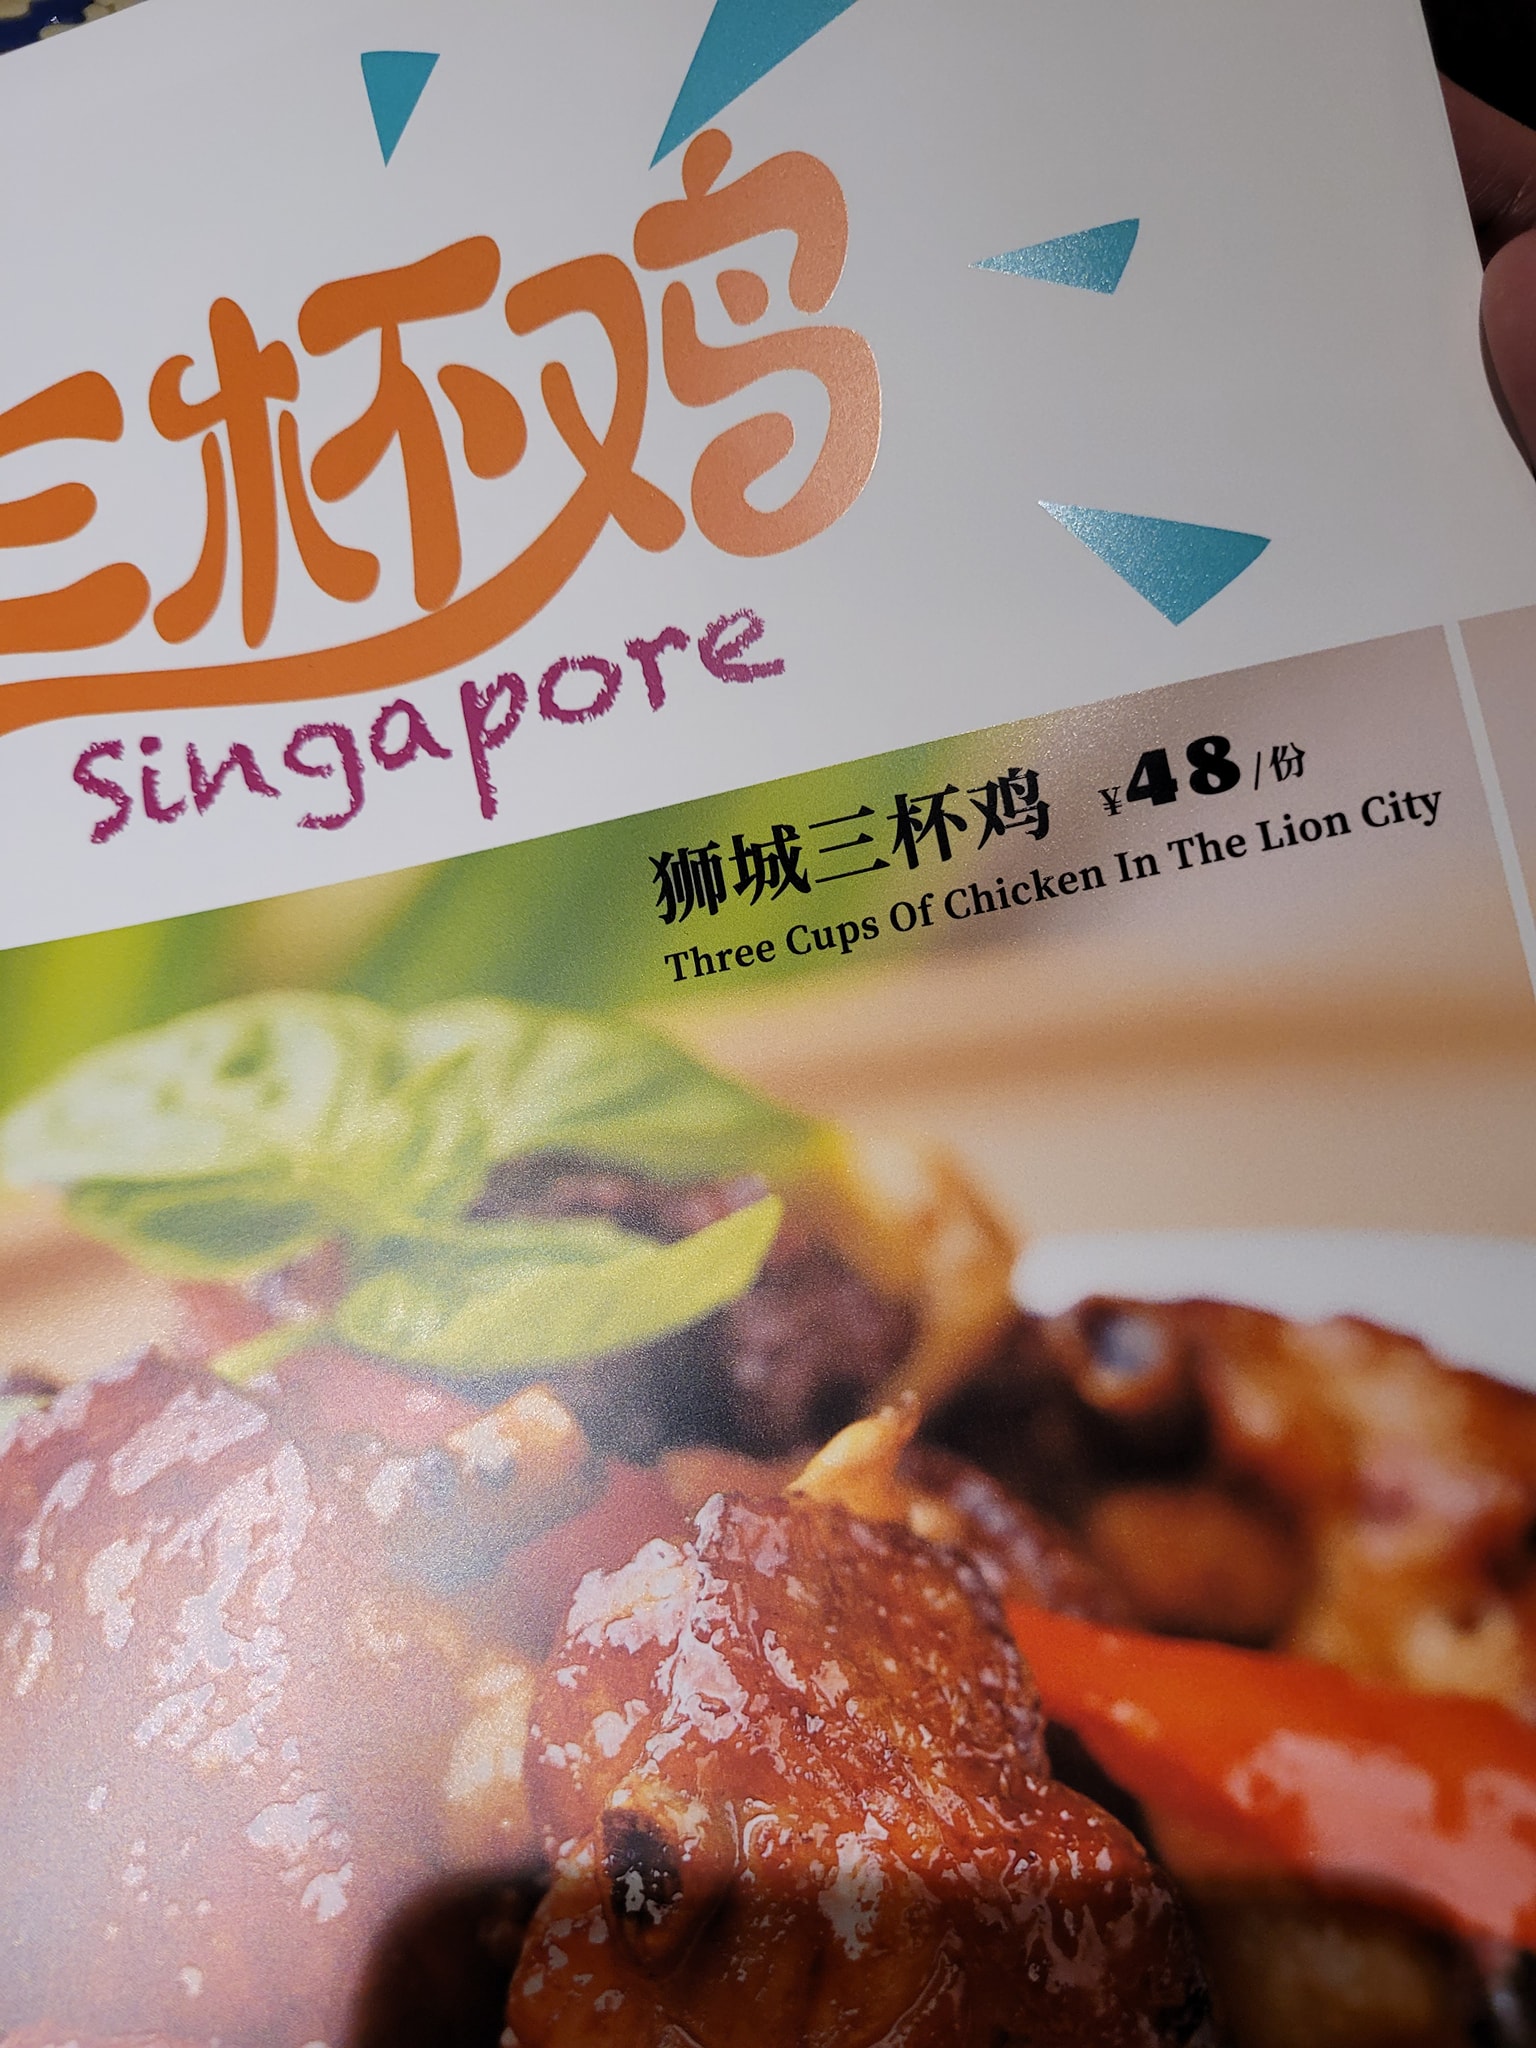 The Singapore-themed restaurant features hilariously bad English translations on their menus. Source: Arthur Pang